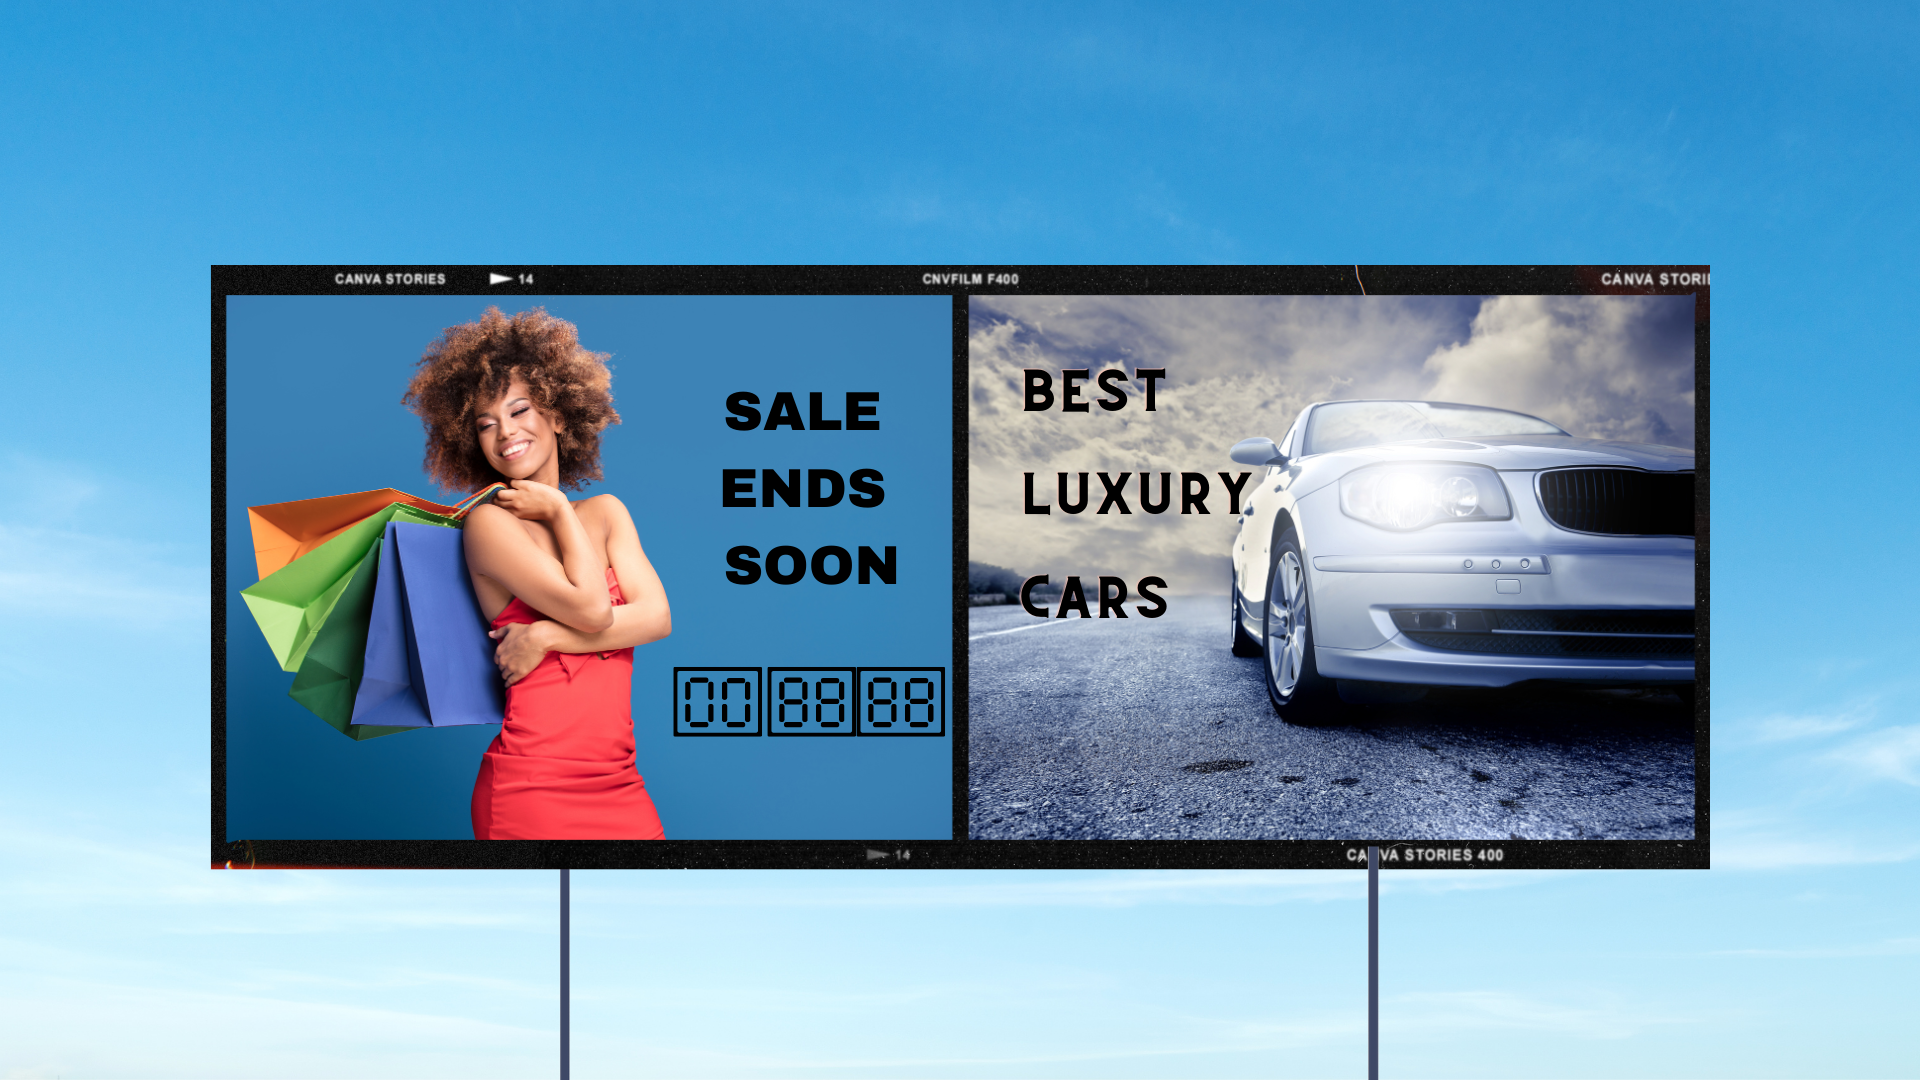 A tall outdoor digital signage partially obscures the clear blue sky. The digital signage is made of two screens: the screen on the left shows a smiling woman in a red dress carrying colorful shopping bags. Besides the figure, is the text &lsquo;Sale Ends Soon&rsquo; and a digital countdown clock showing 00:88:88. The screen on the right shows the image of the front of a steel-colored car on a road, and the text &lsquo;Best Luxury Cars&rsquo;.